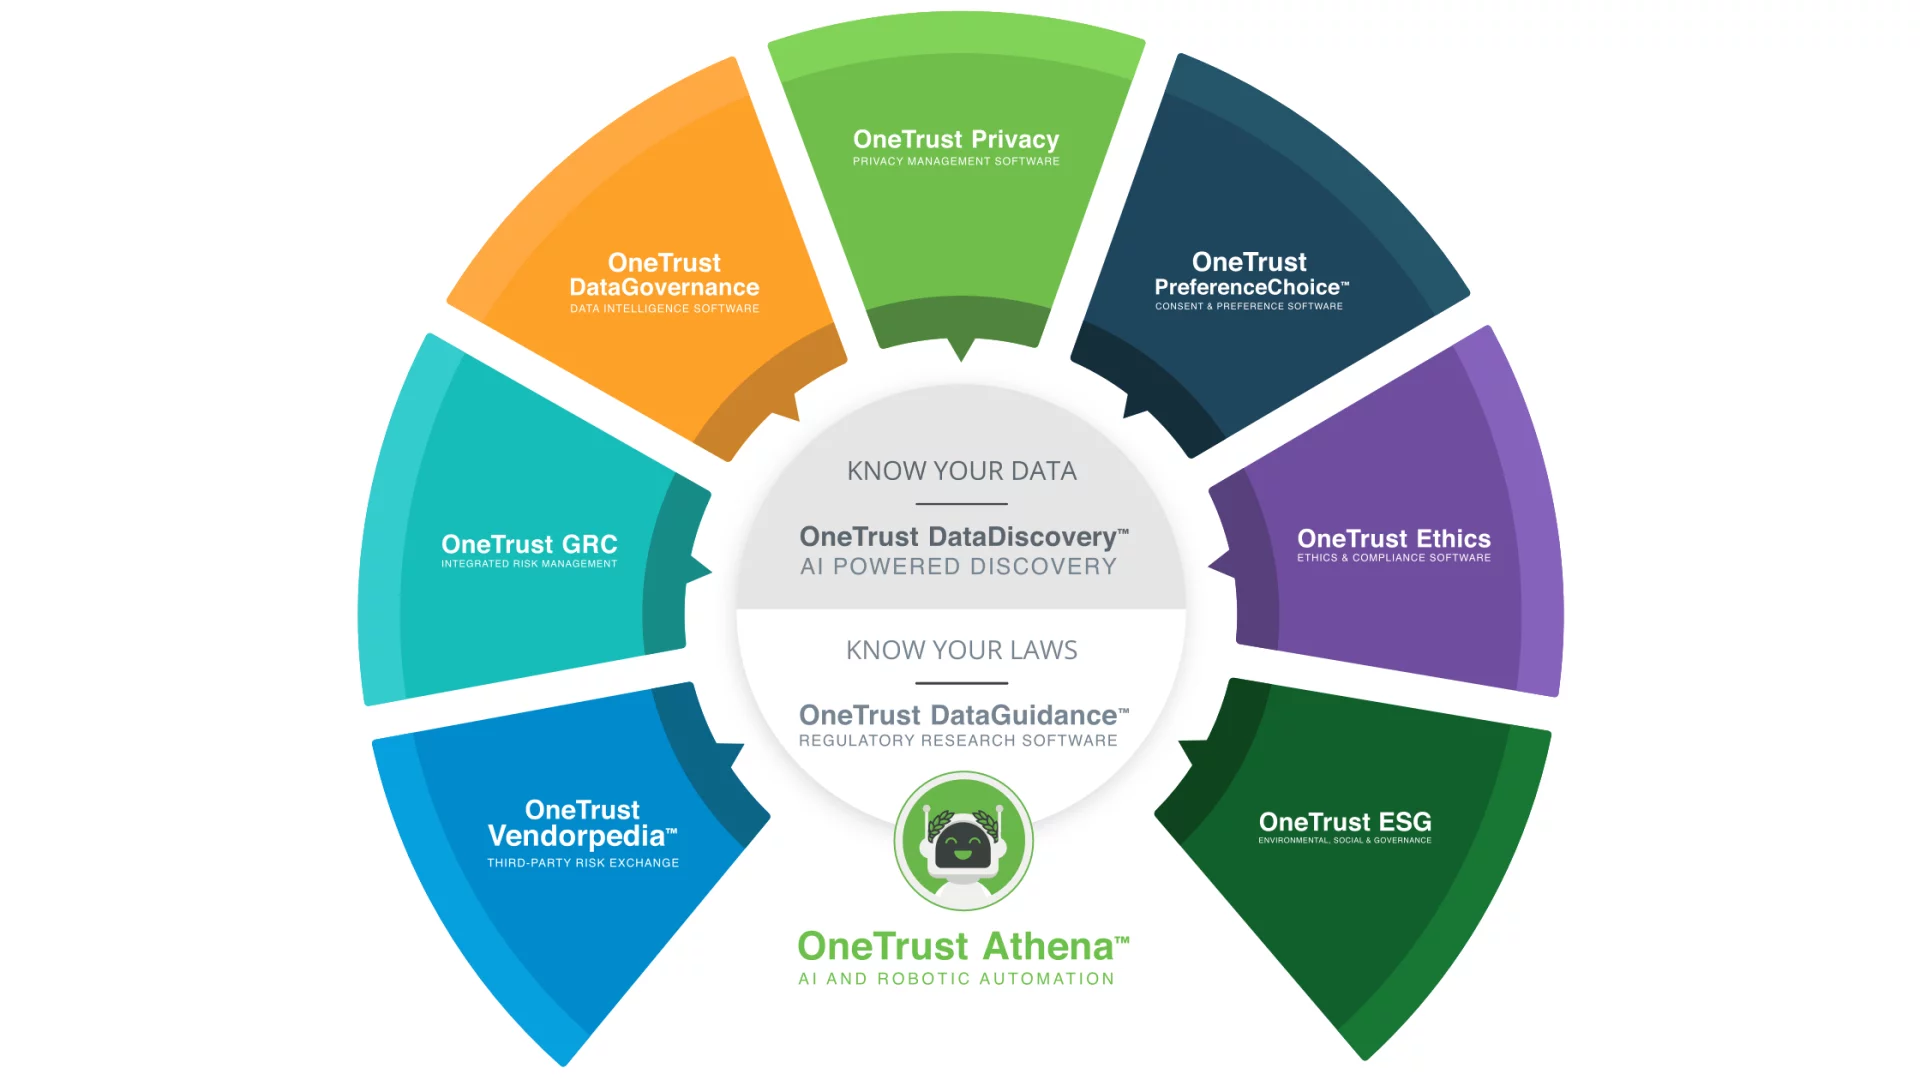 OneTrust - DBMS Tools